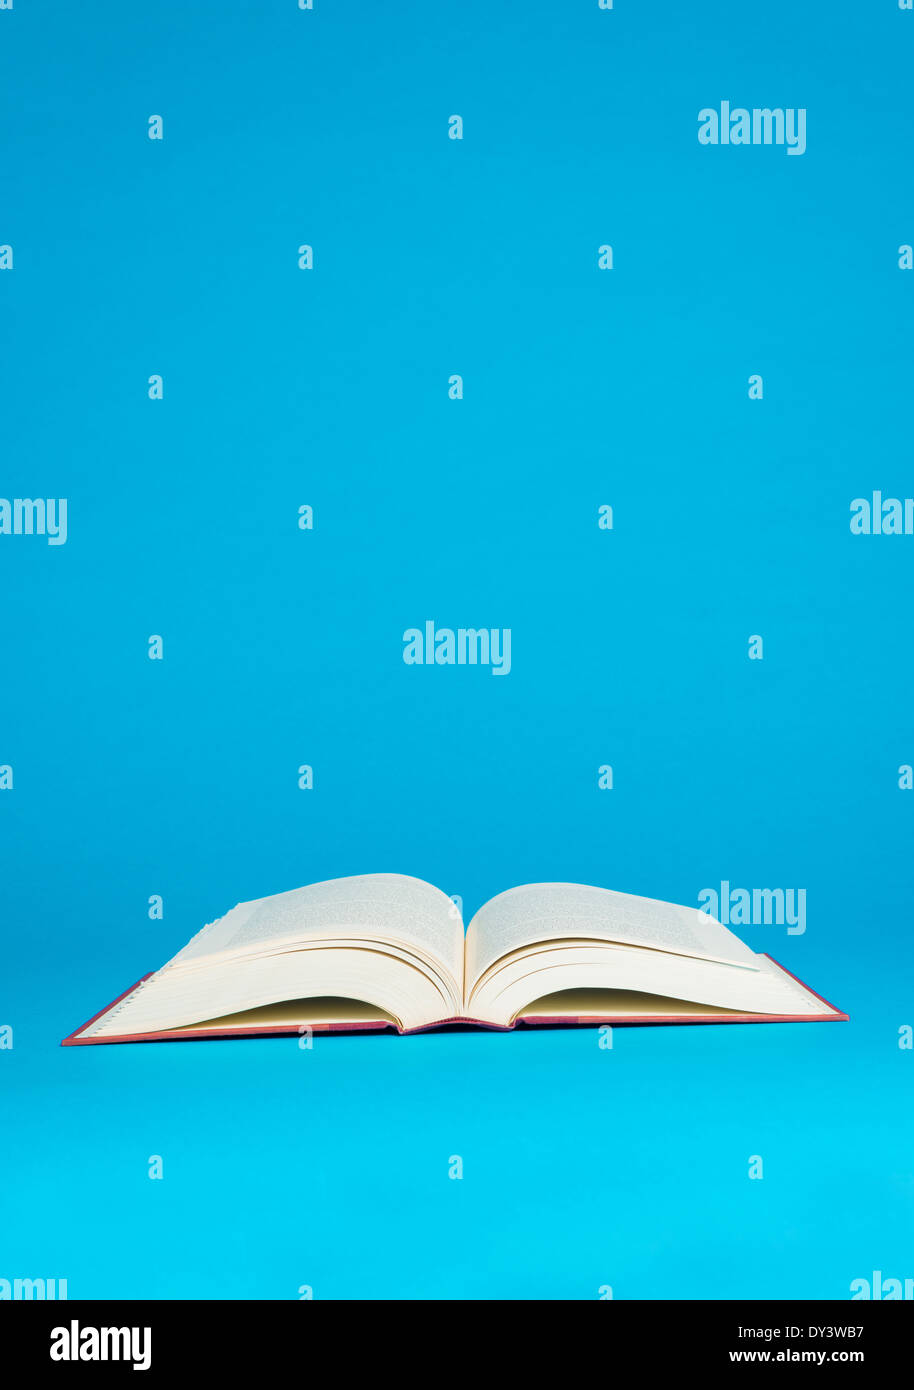 An open book on a bright blue background Stock Photo